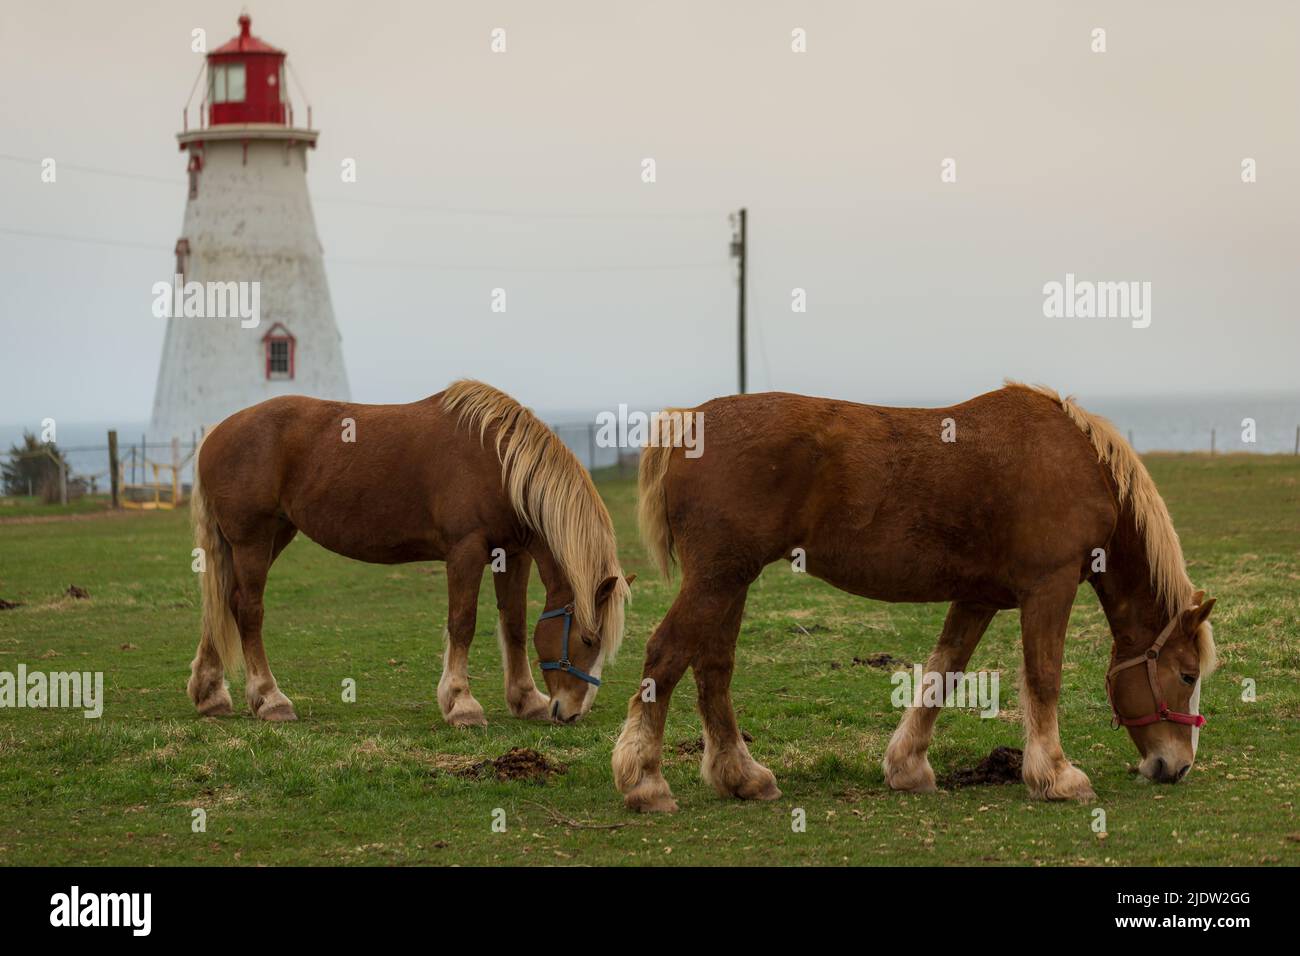 Blond' Belgian Draft horse aka Flanders Horse grazing on a farmland in the background of a light house, Prince Edward Island, Canada Stock Photo